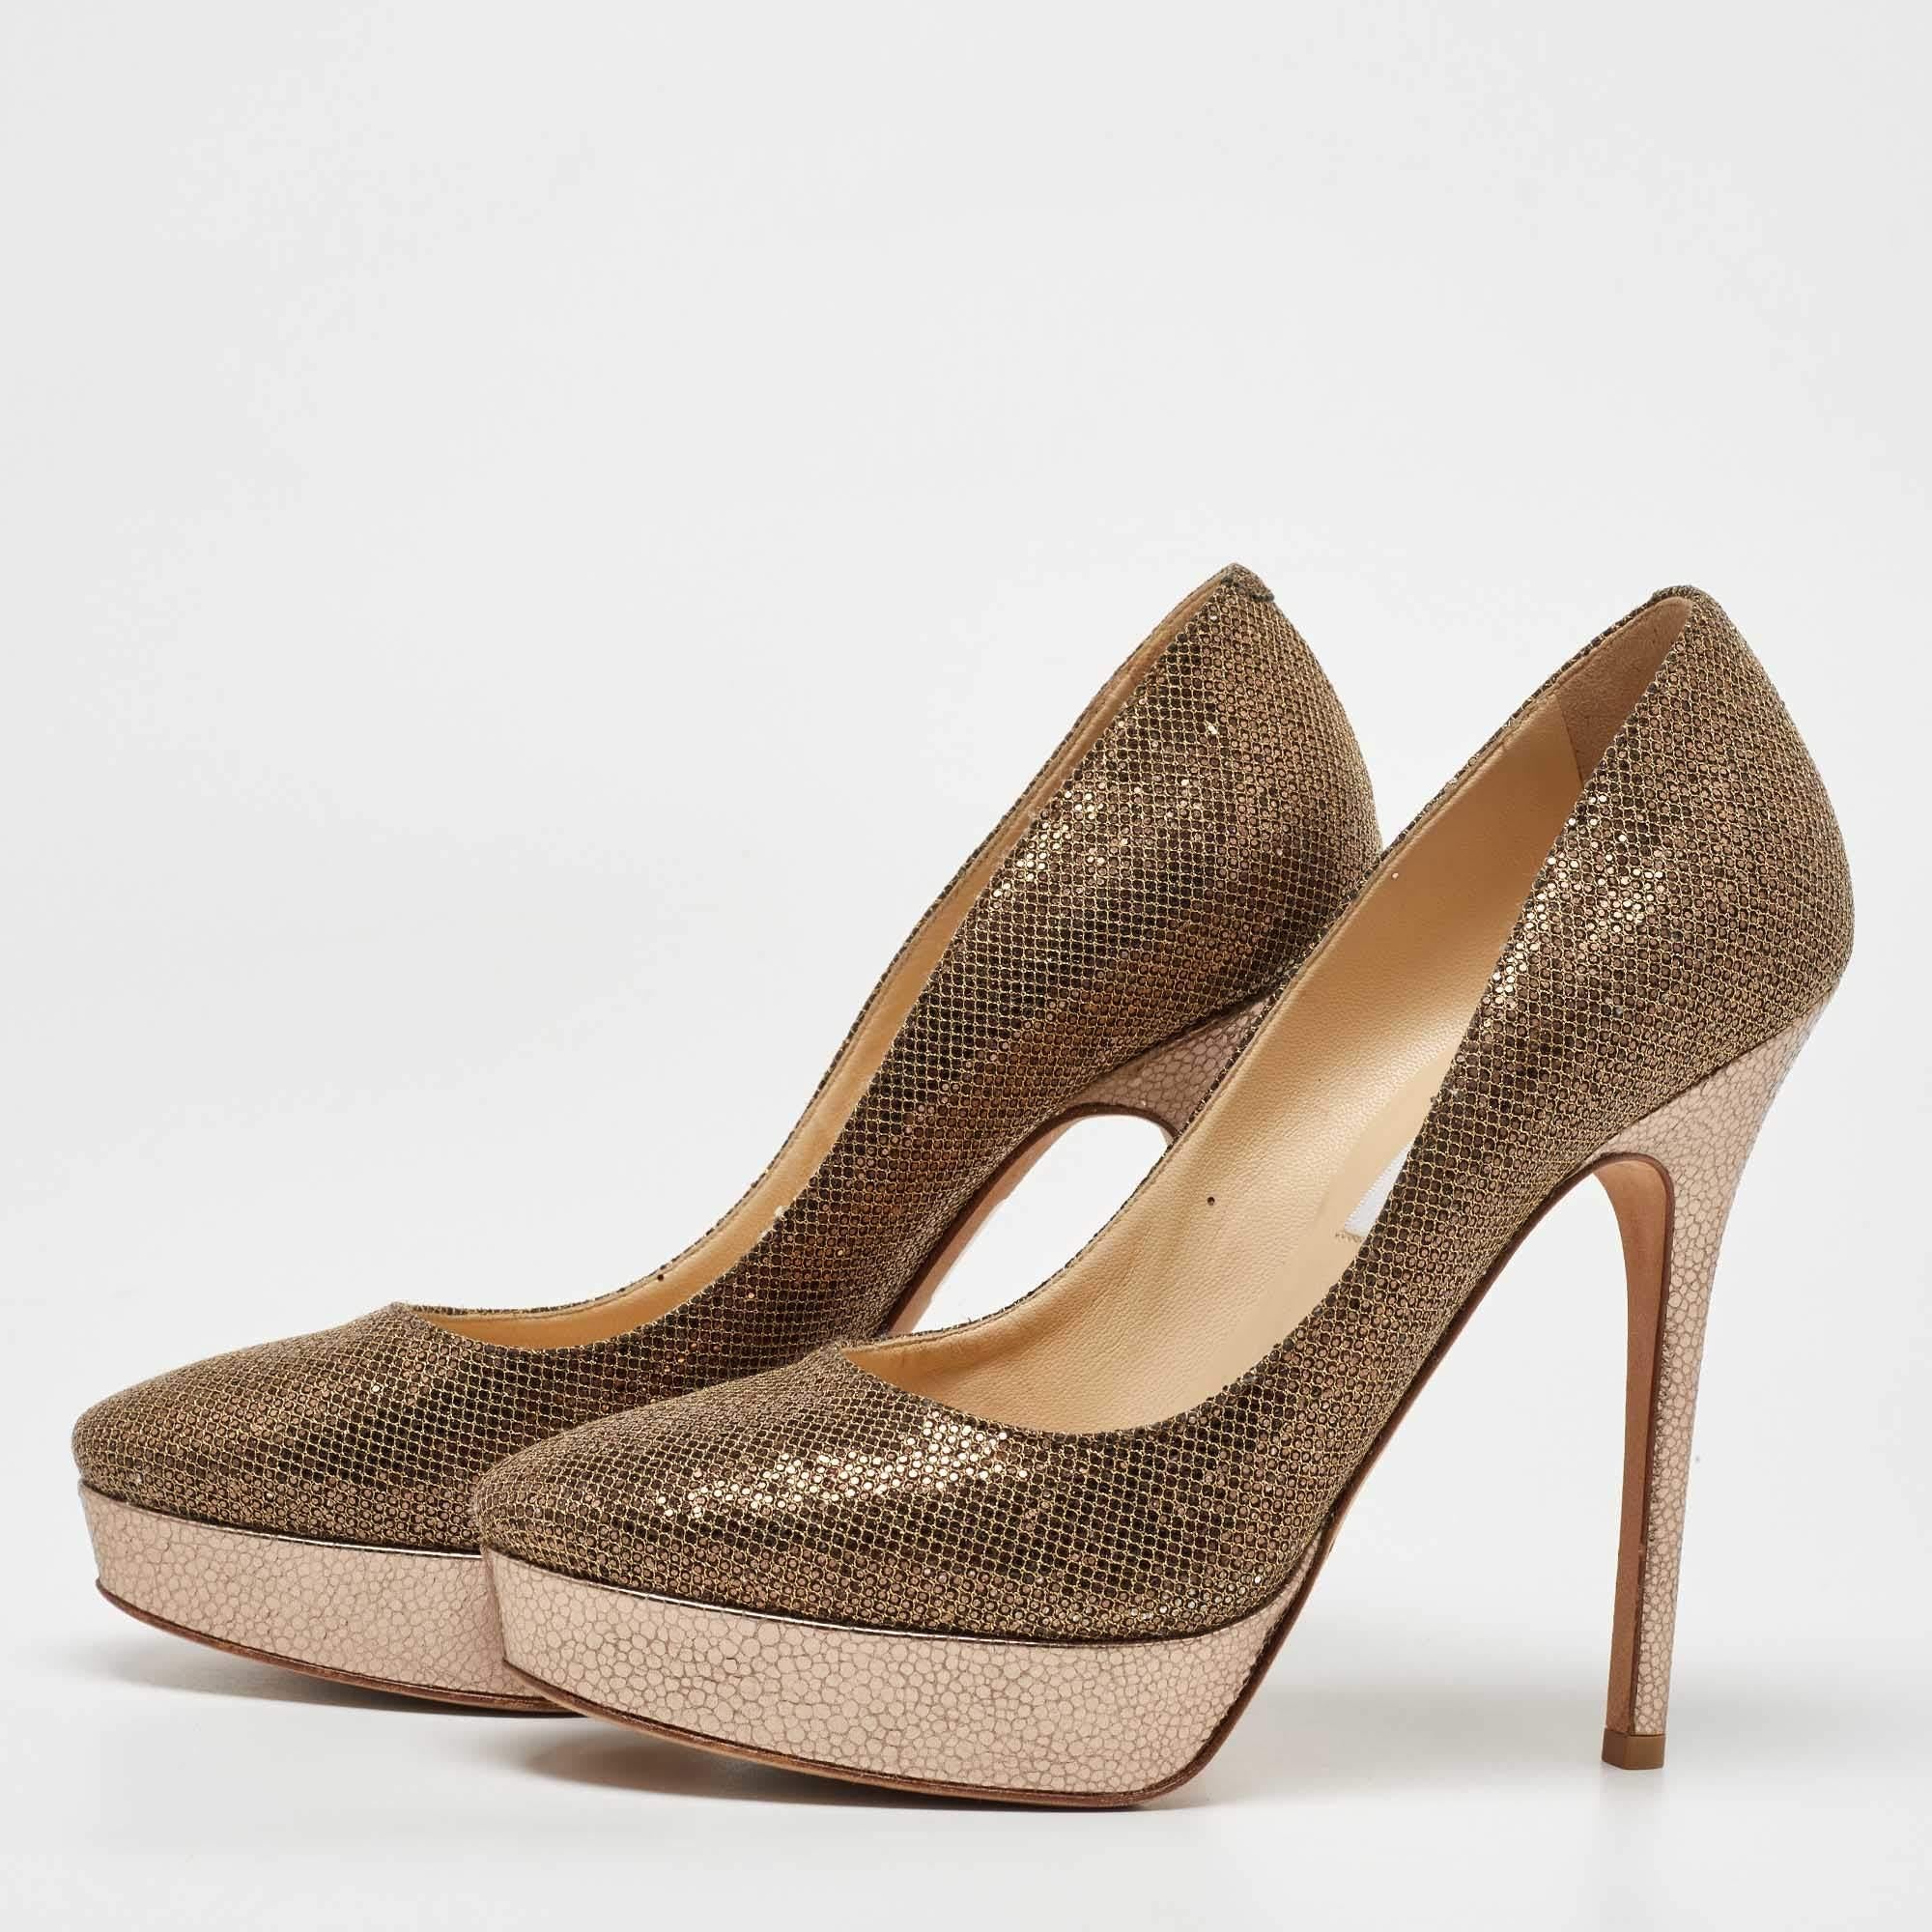 Jimmy Choo Gold Glitter and Leather Cosmic Platform Pumps Size 37.5 In Good Condition For Sale In Dubai, Al Qouz 2